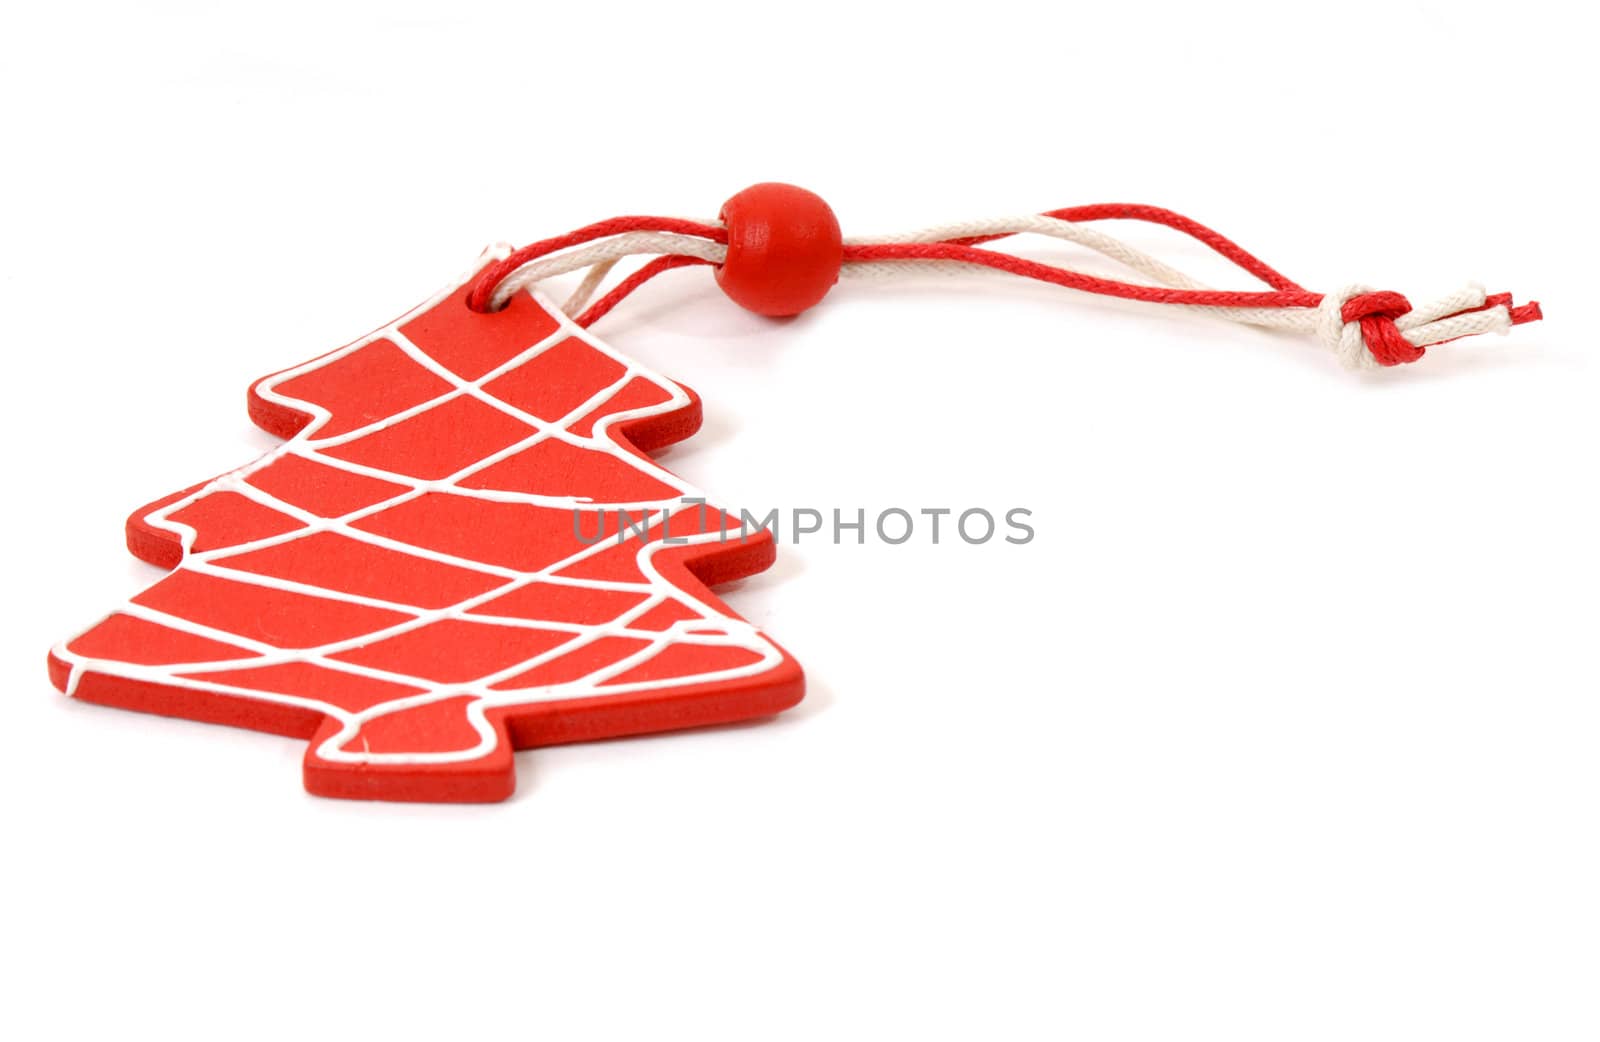 Christmas ornament of a red spruce wood in white background